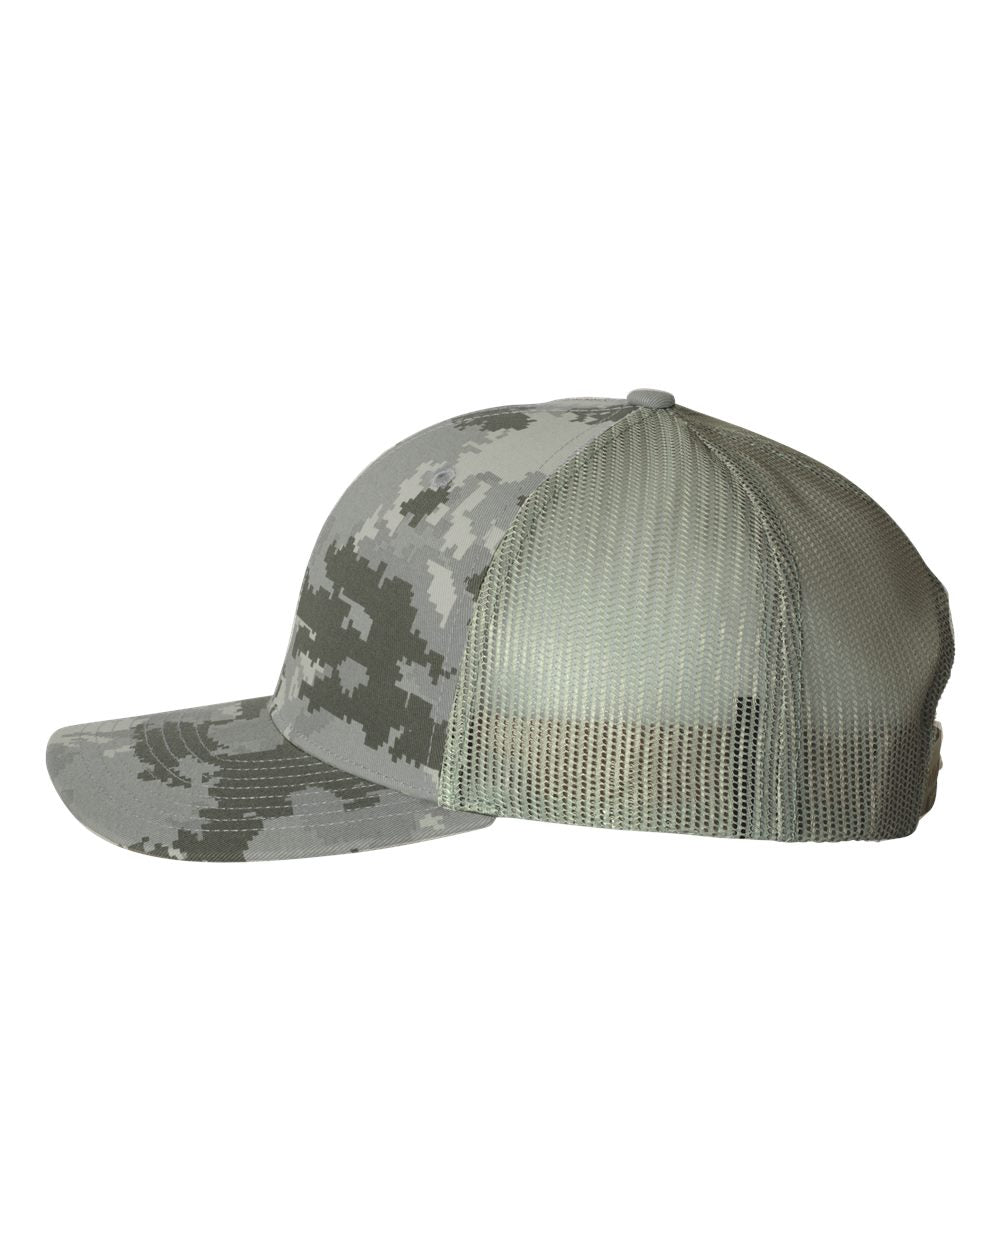 PAPA Know How 3D Patterned Snapback Trucker Hat- Military Digital Camo - Ten Gallon Hat Co.